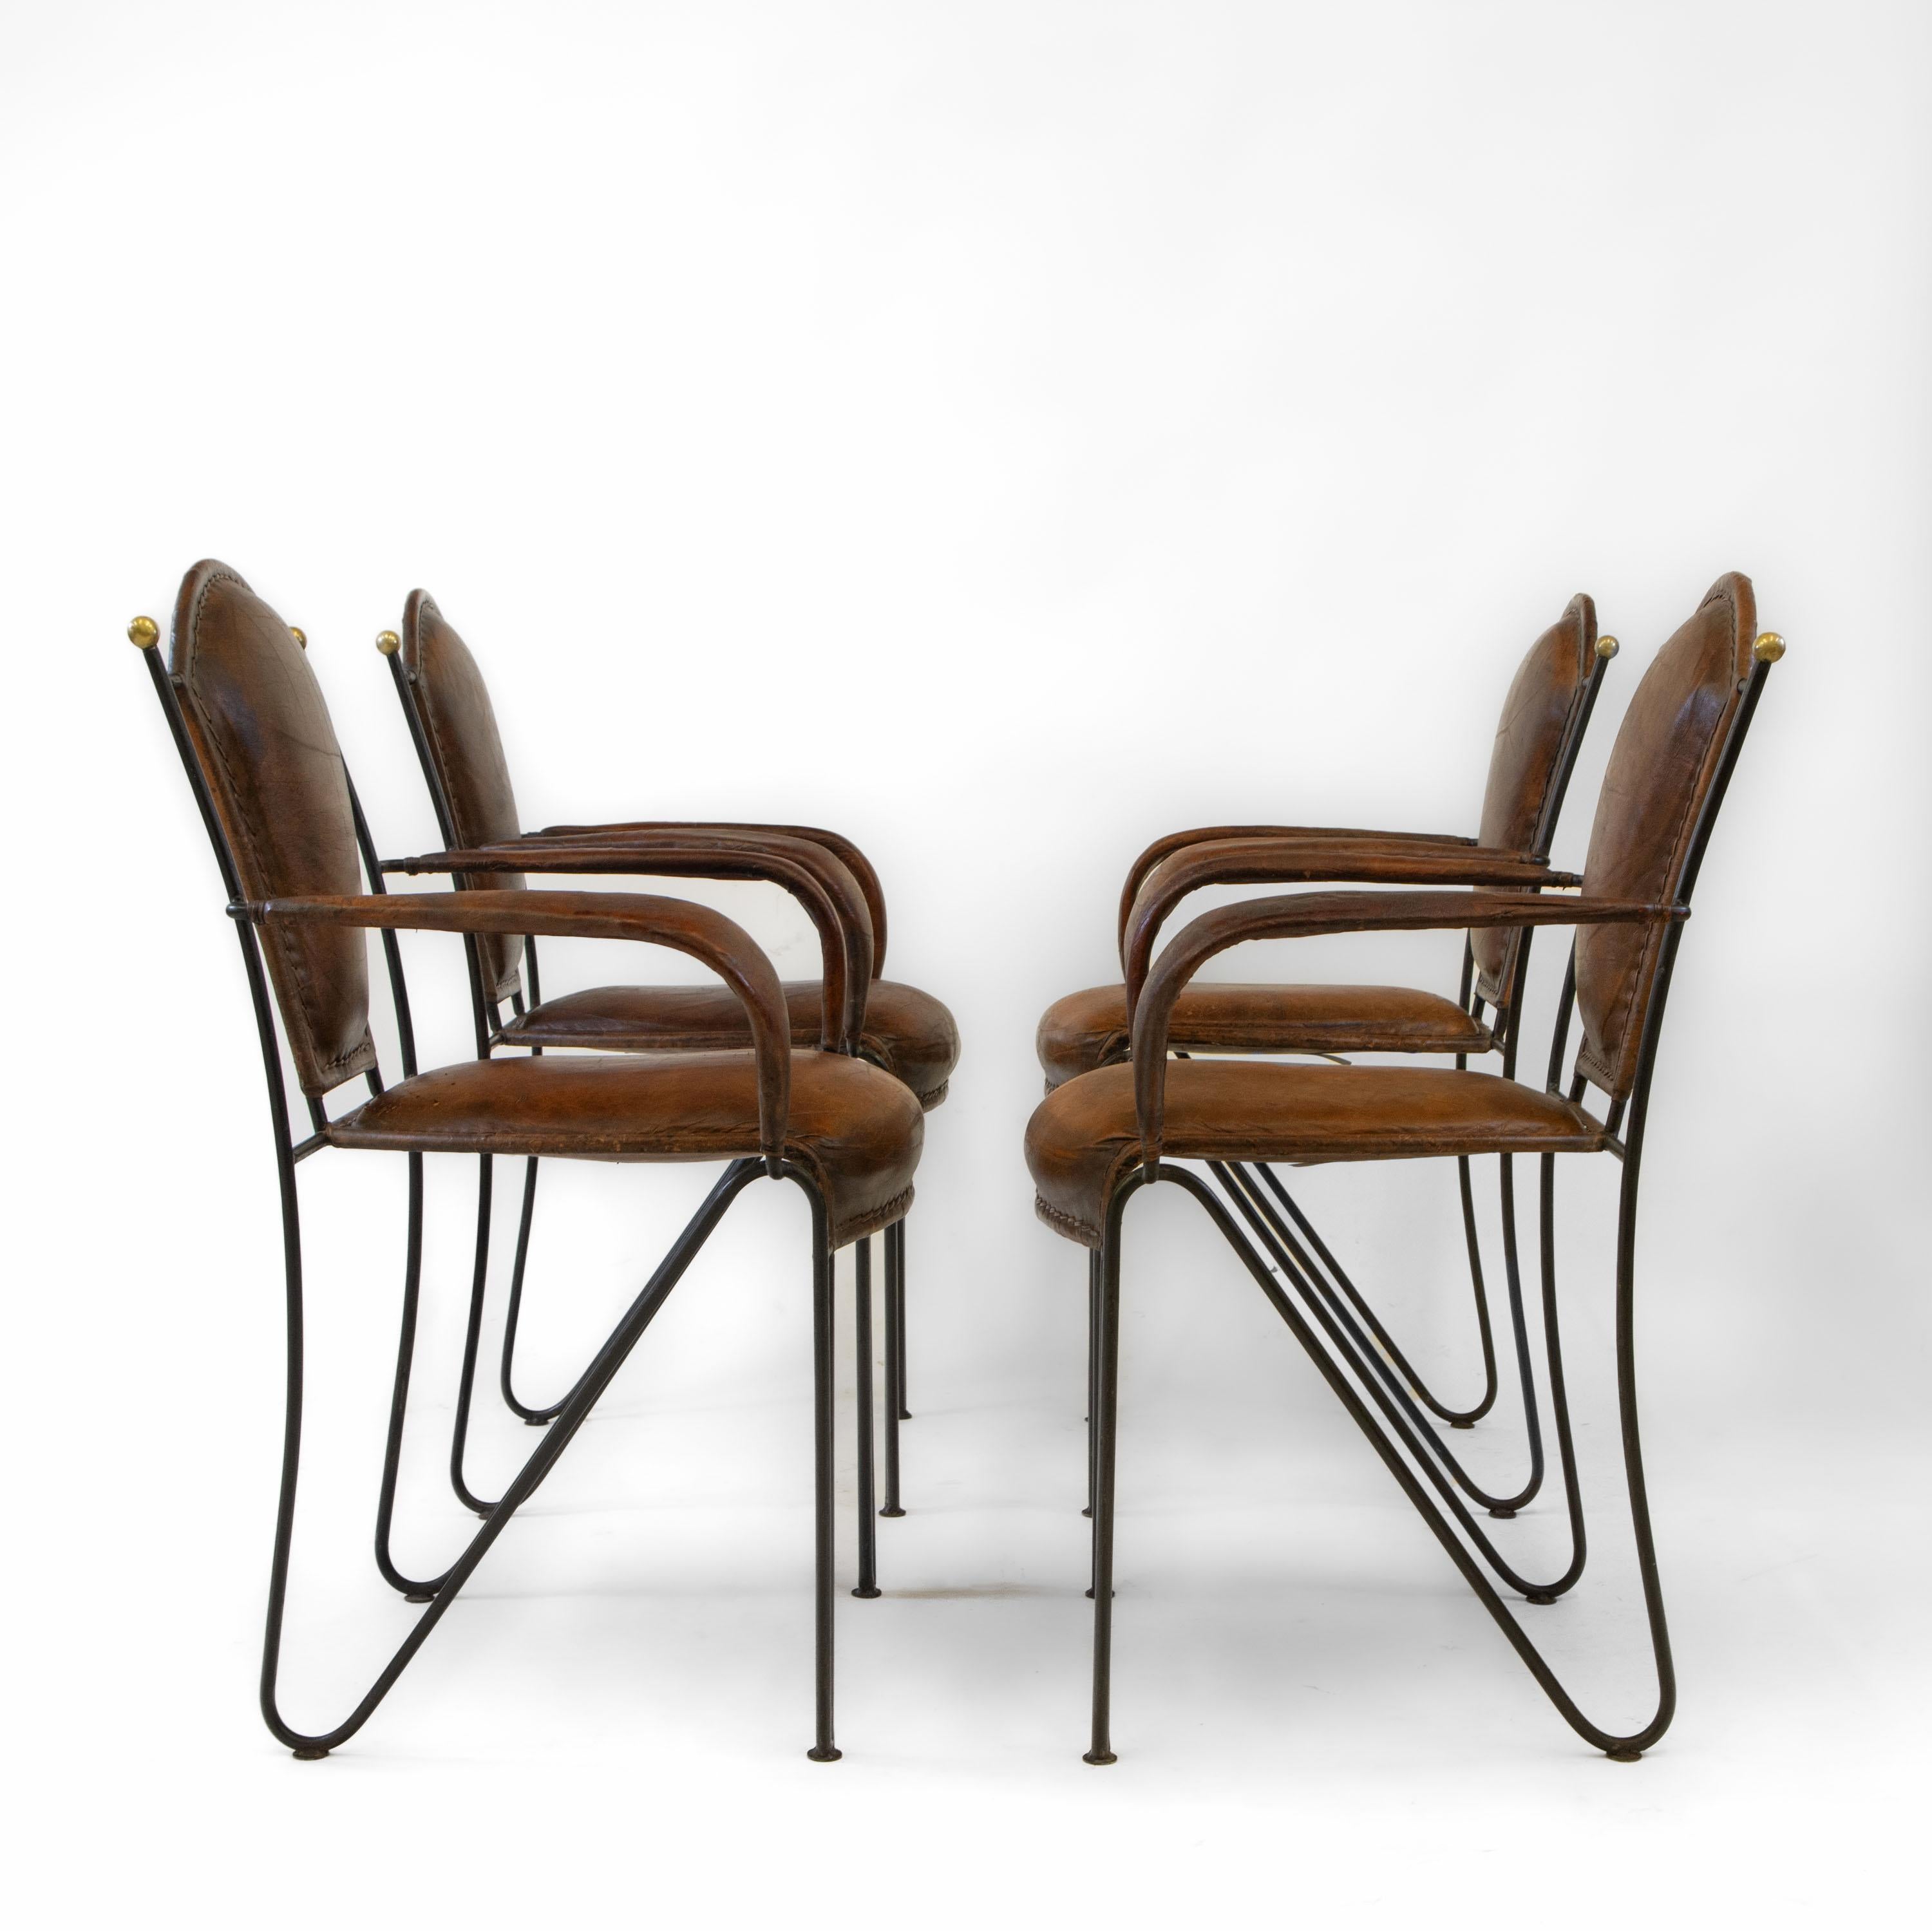 Fabulous set of four mid century French leather & iron dining chairs. Circa 1950’s.

I also have these chairs available as sets of two, should you not require all four. Please do look at these listings for more photographs.

The chairs have brass